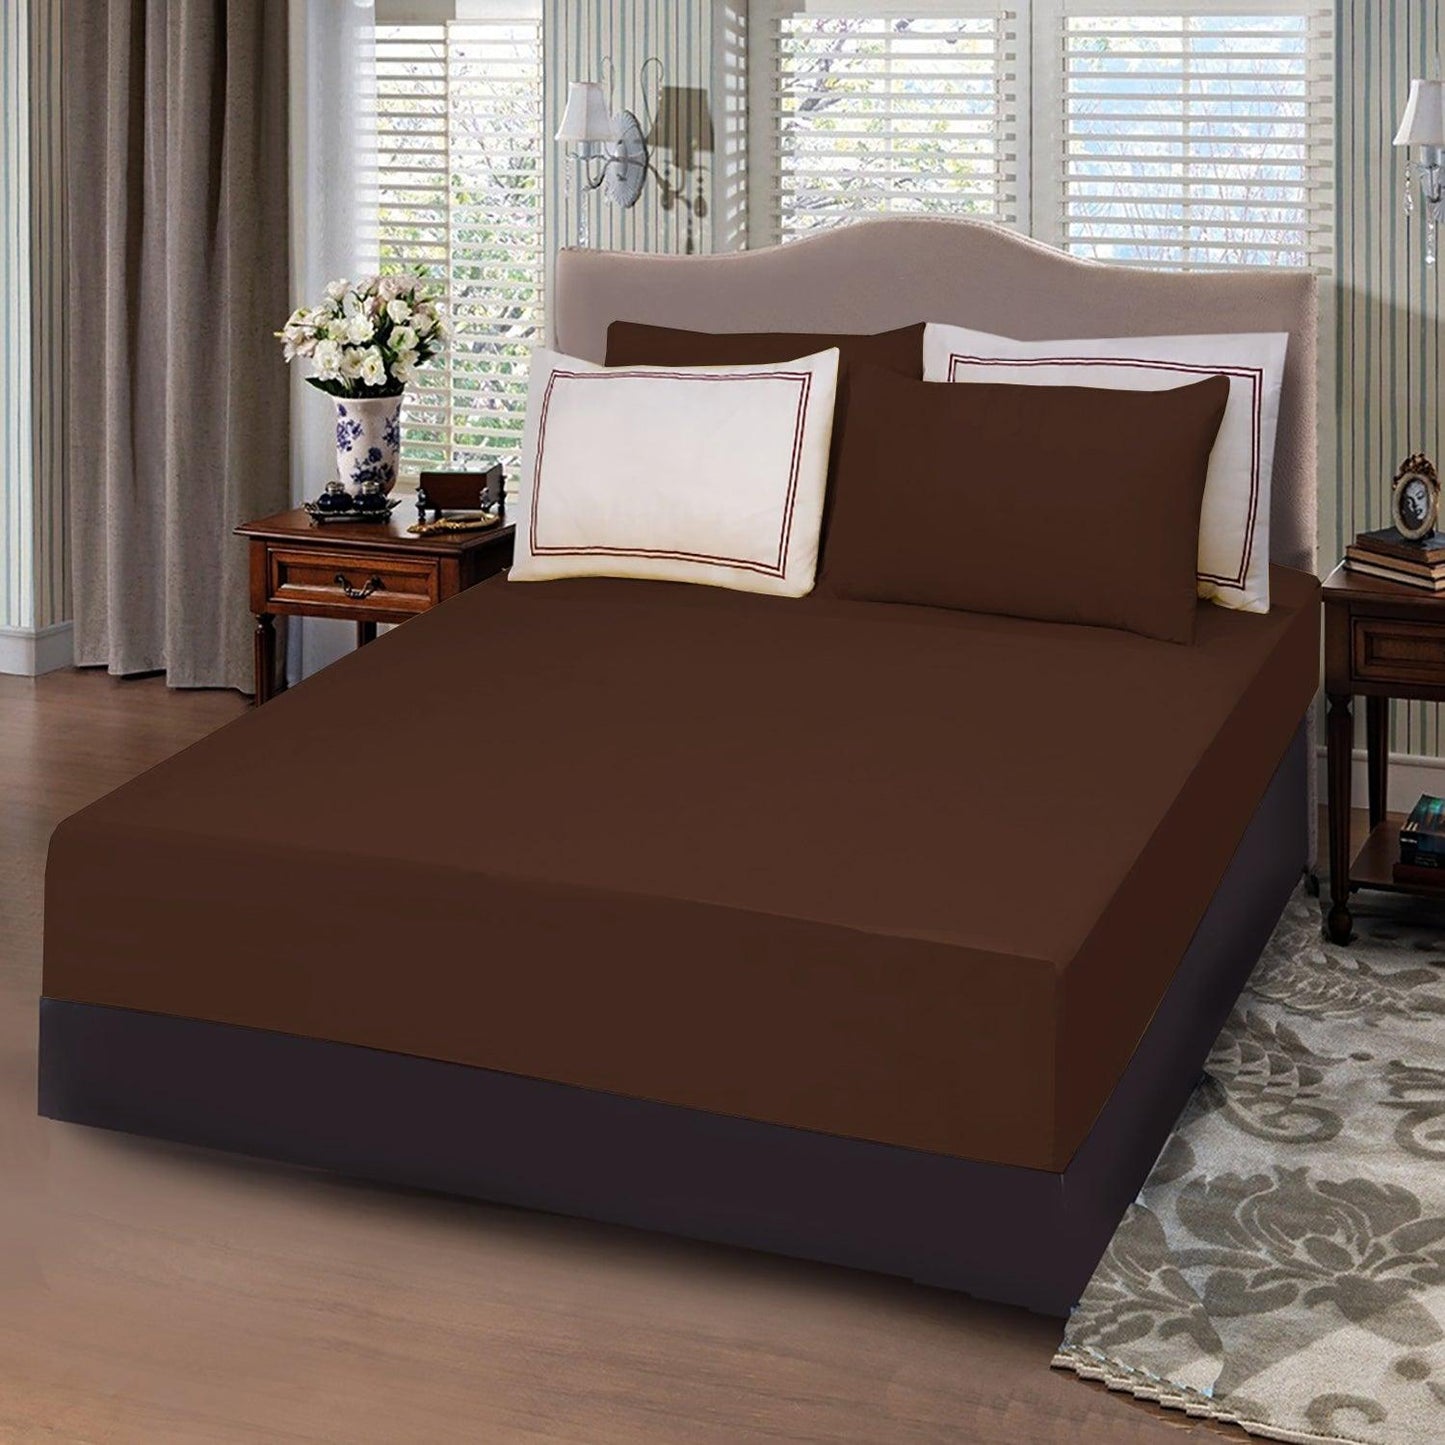 5 Pc's Baratta Stitched Fitted Sheet Set Brown - 92Bedding